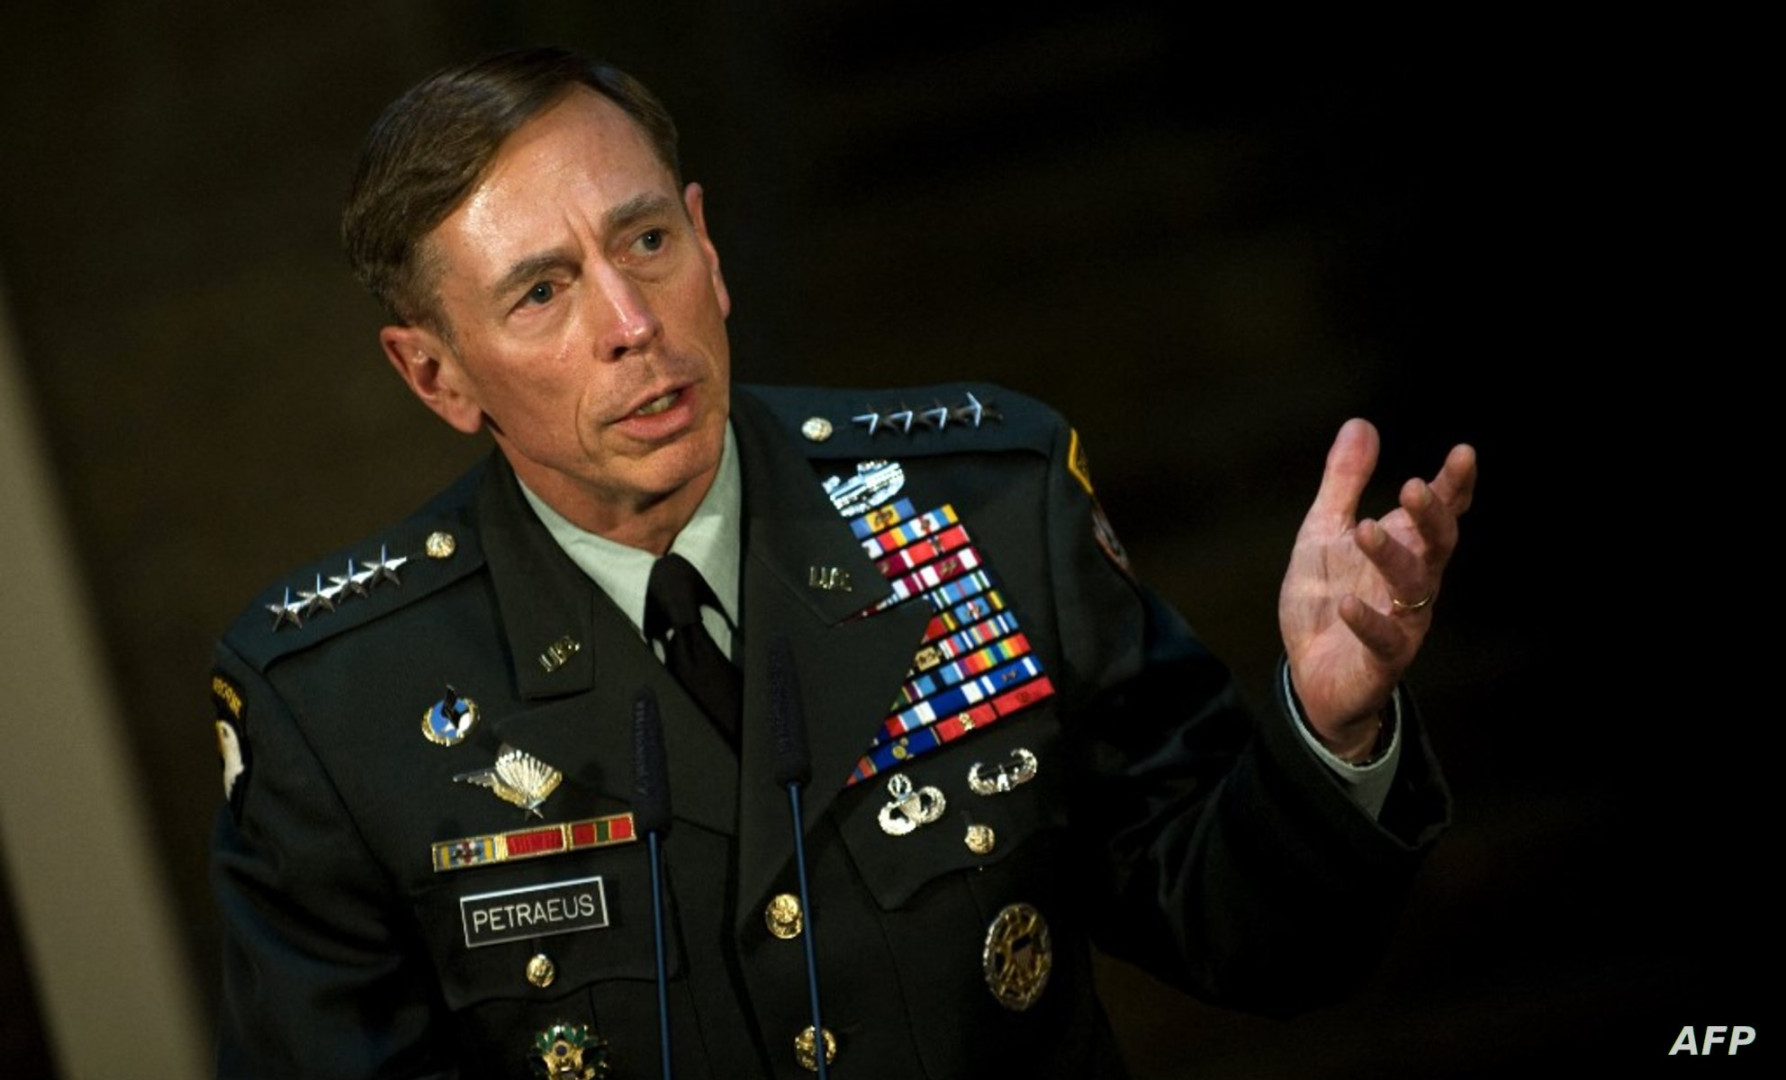 General Petraeus urges Israel to consider counterinsurgency strategy in Gaza